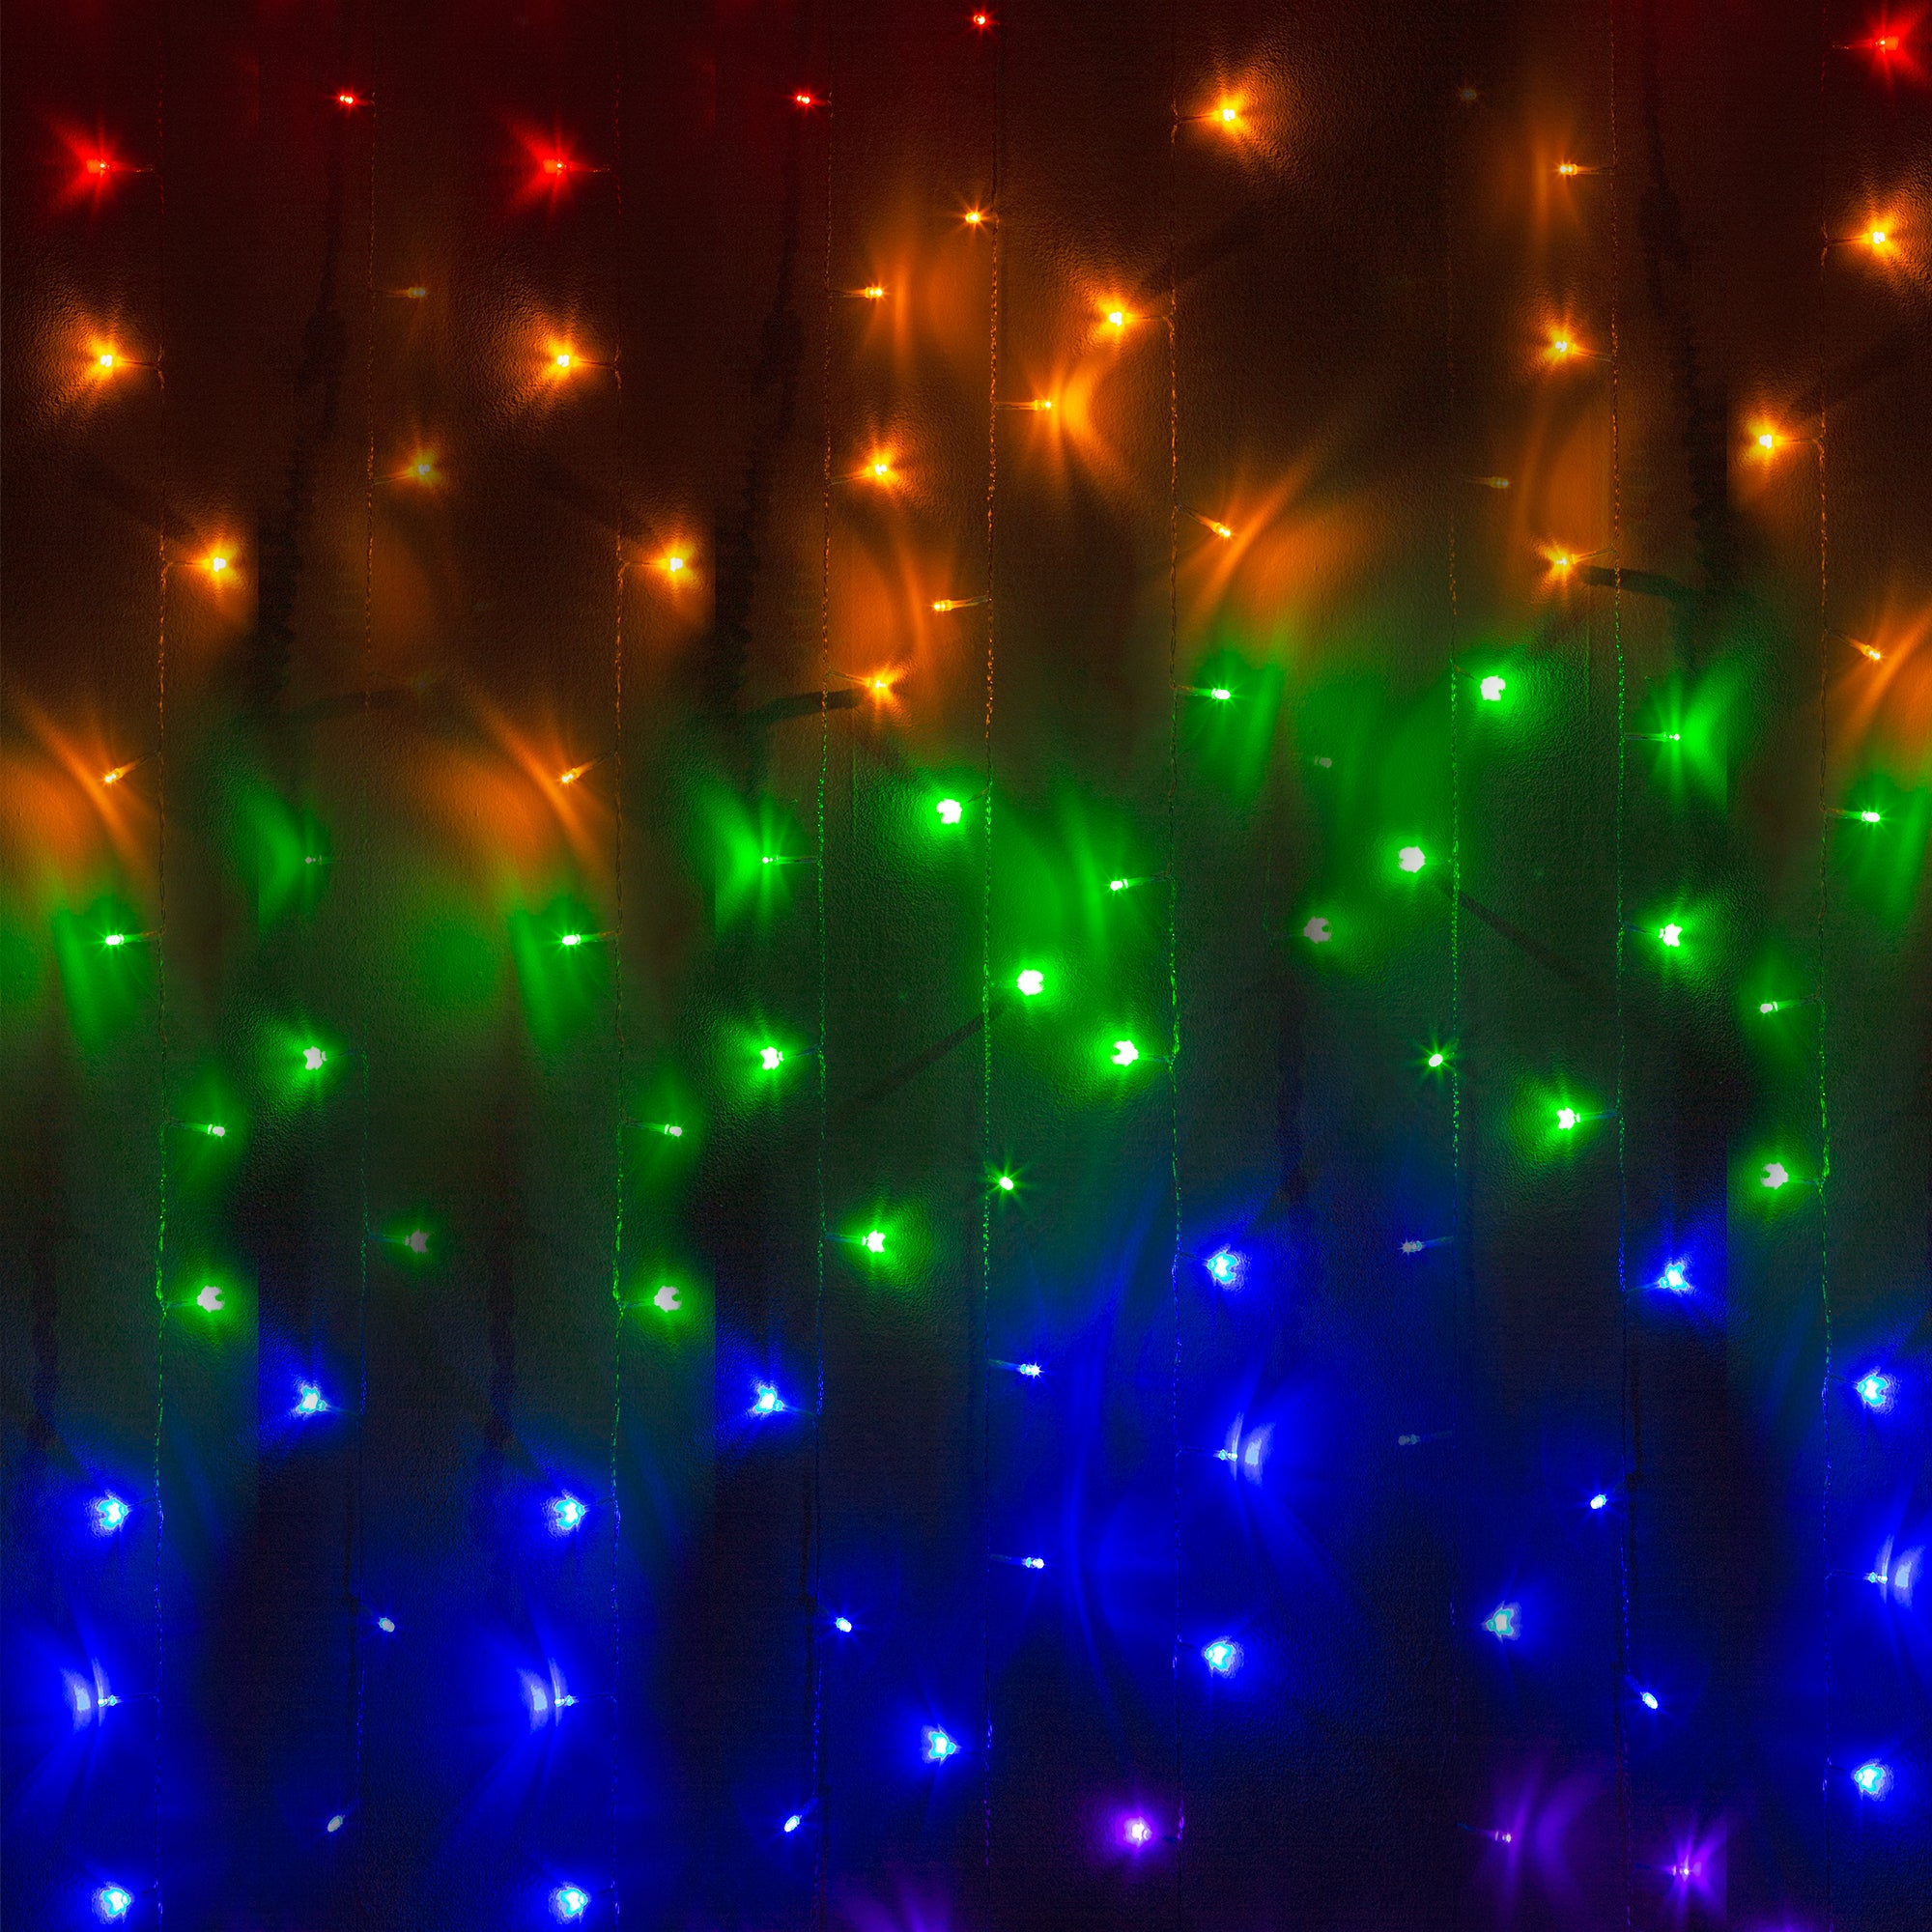 5' x 3.5' LED RGB Curtain Light with Remote - West & Arrow